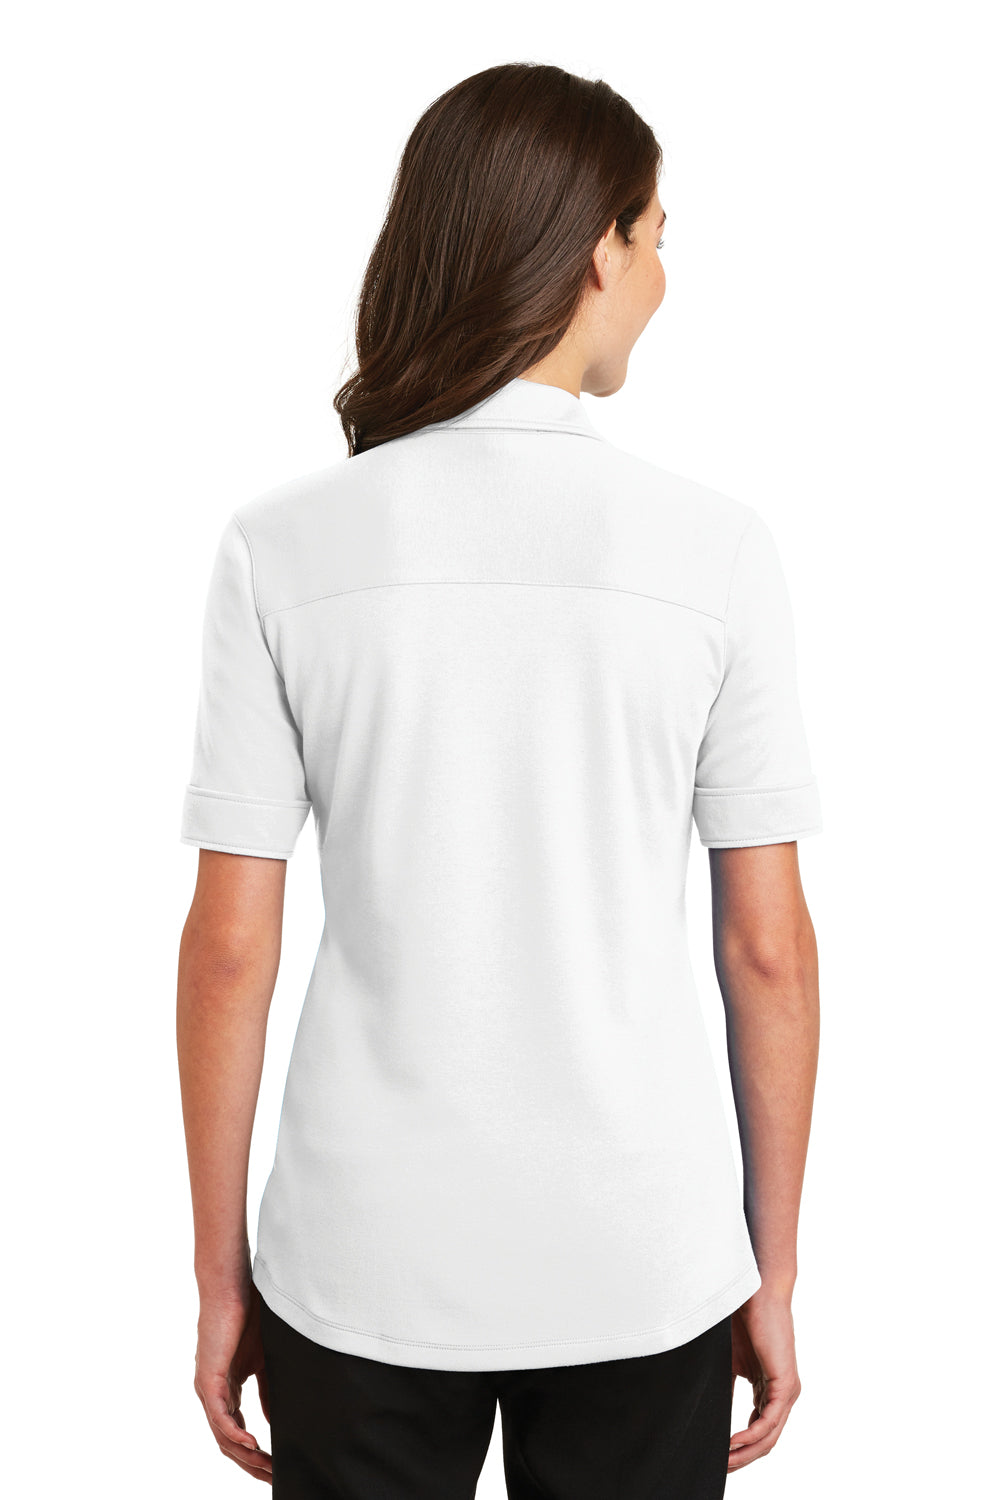 Port Authority L5200 Womens Silk Touch Performance Moisture Wicking Short Sleeve Polo Shirt White Back